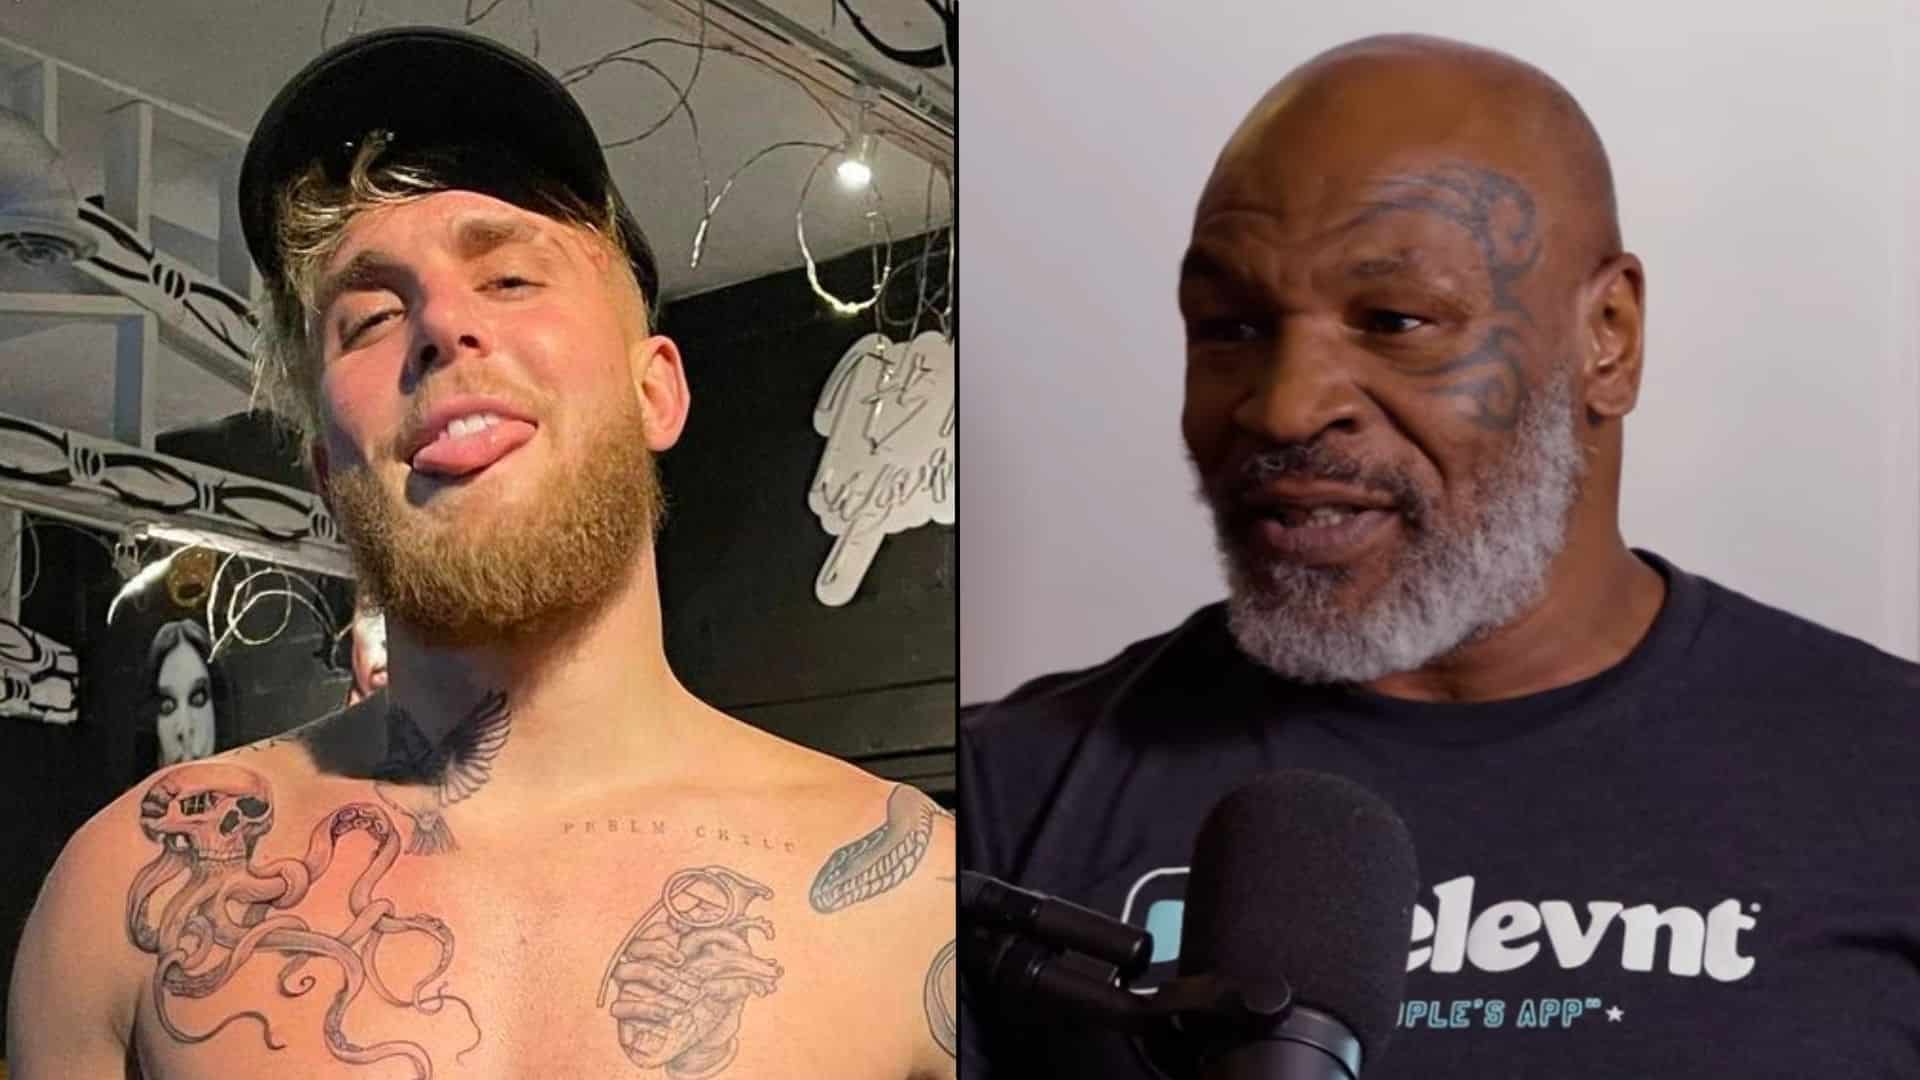 Mike Tyson open to fighting Jake Paul but thinks he's too “crazy” to stay out of trouble - Dexerto